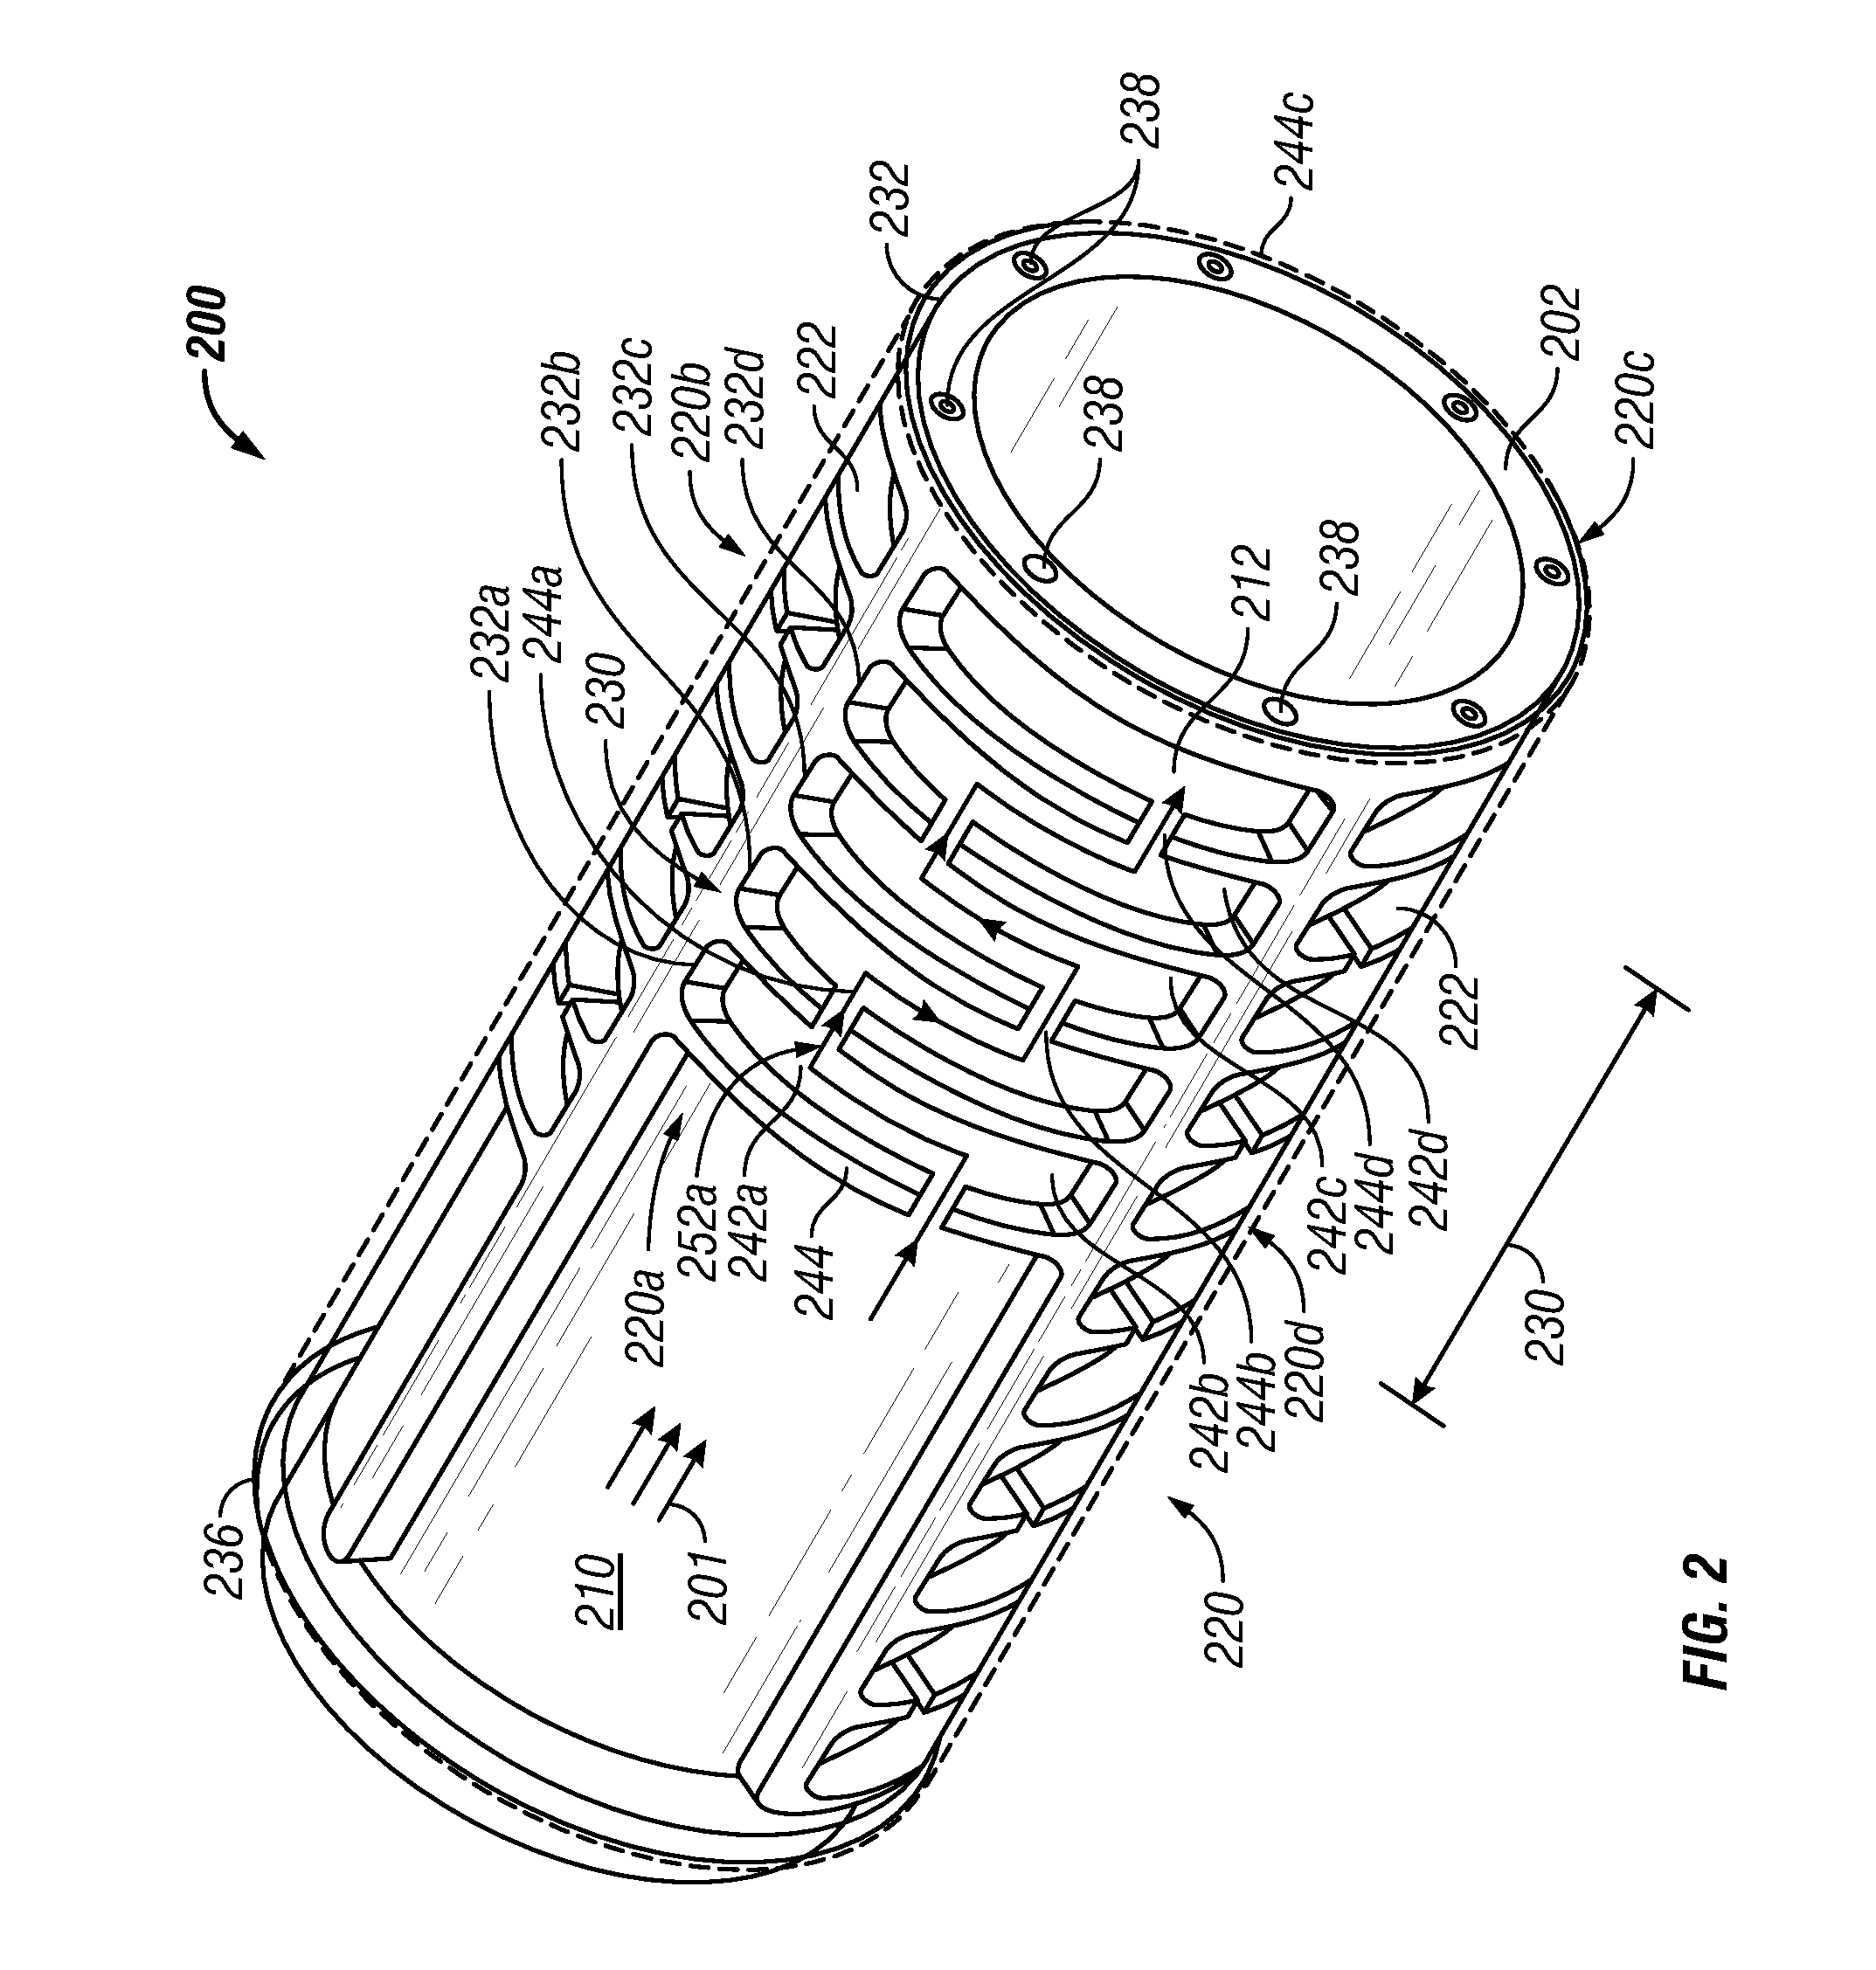 Wireline-Adjustable Downhole Flow Control Devices and Methods for Using Same